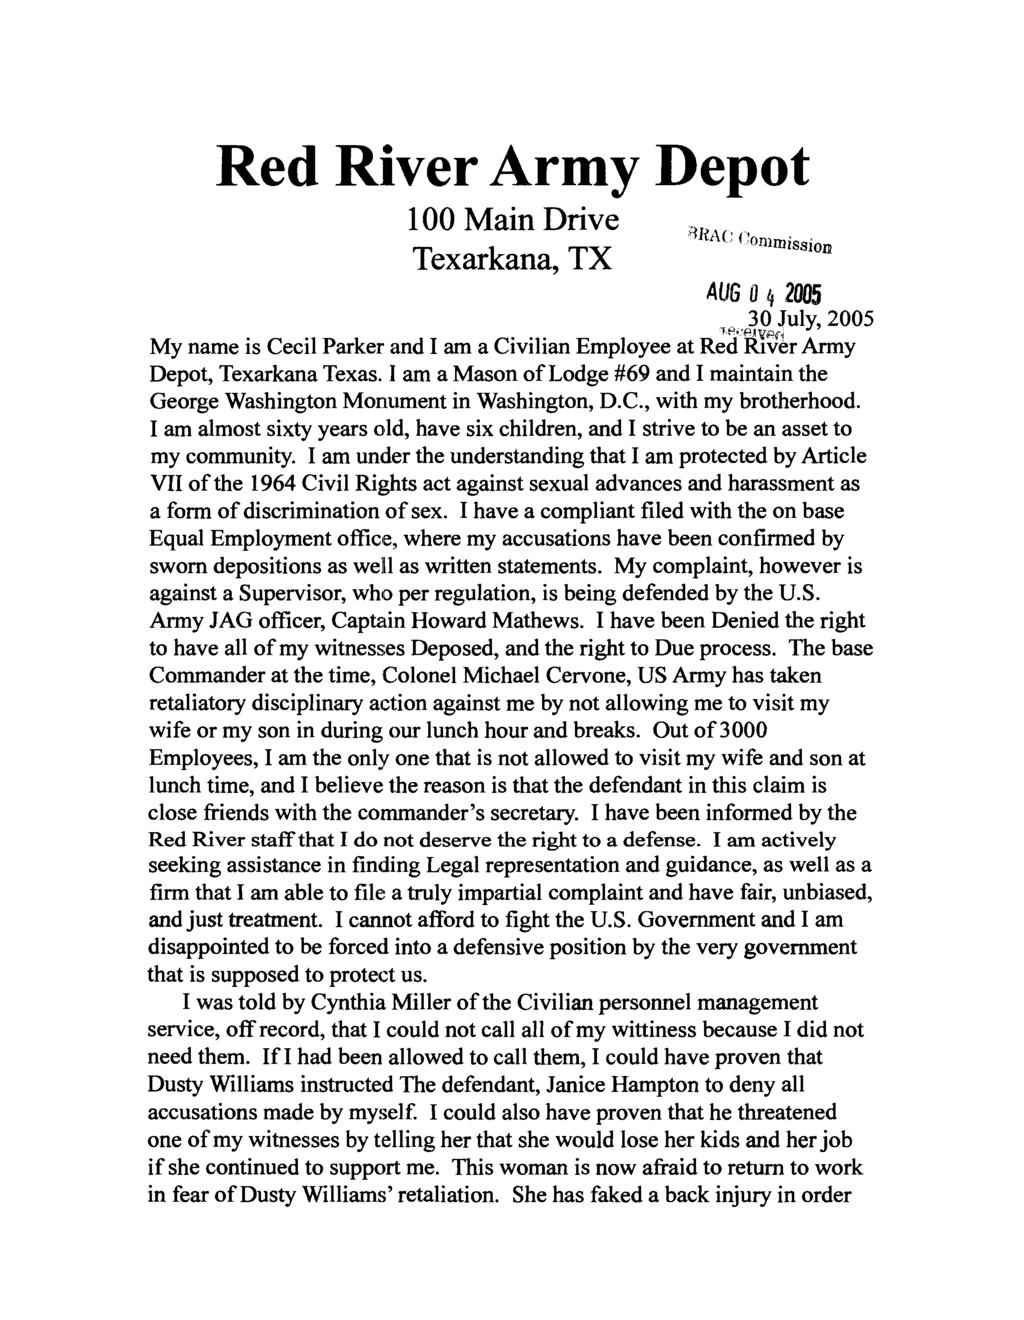 DCN 6743 Red River Army Depot 100 Main Drive Tm~,ission Texarkana, TX 30 July, 2005 r t.b'env~~, My name is Cecil Parker and I am a Civilian Employee at Red kver Army Depot, Texarkana Texas.